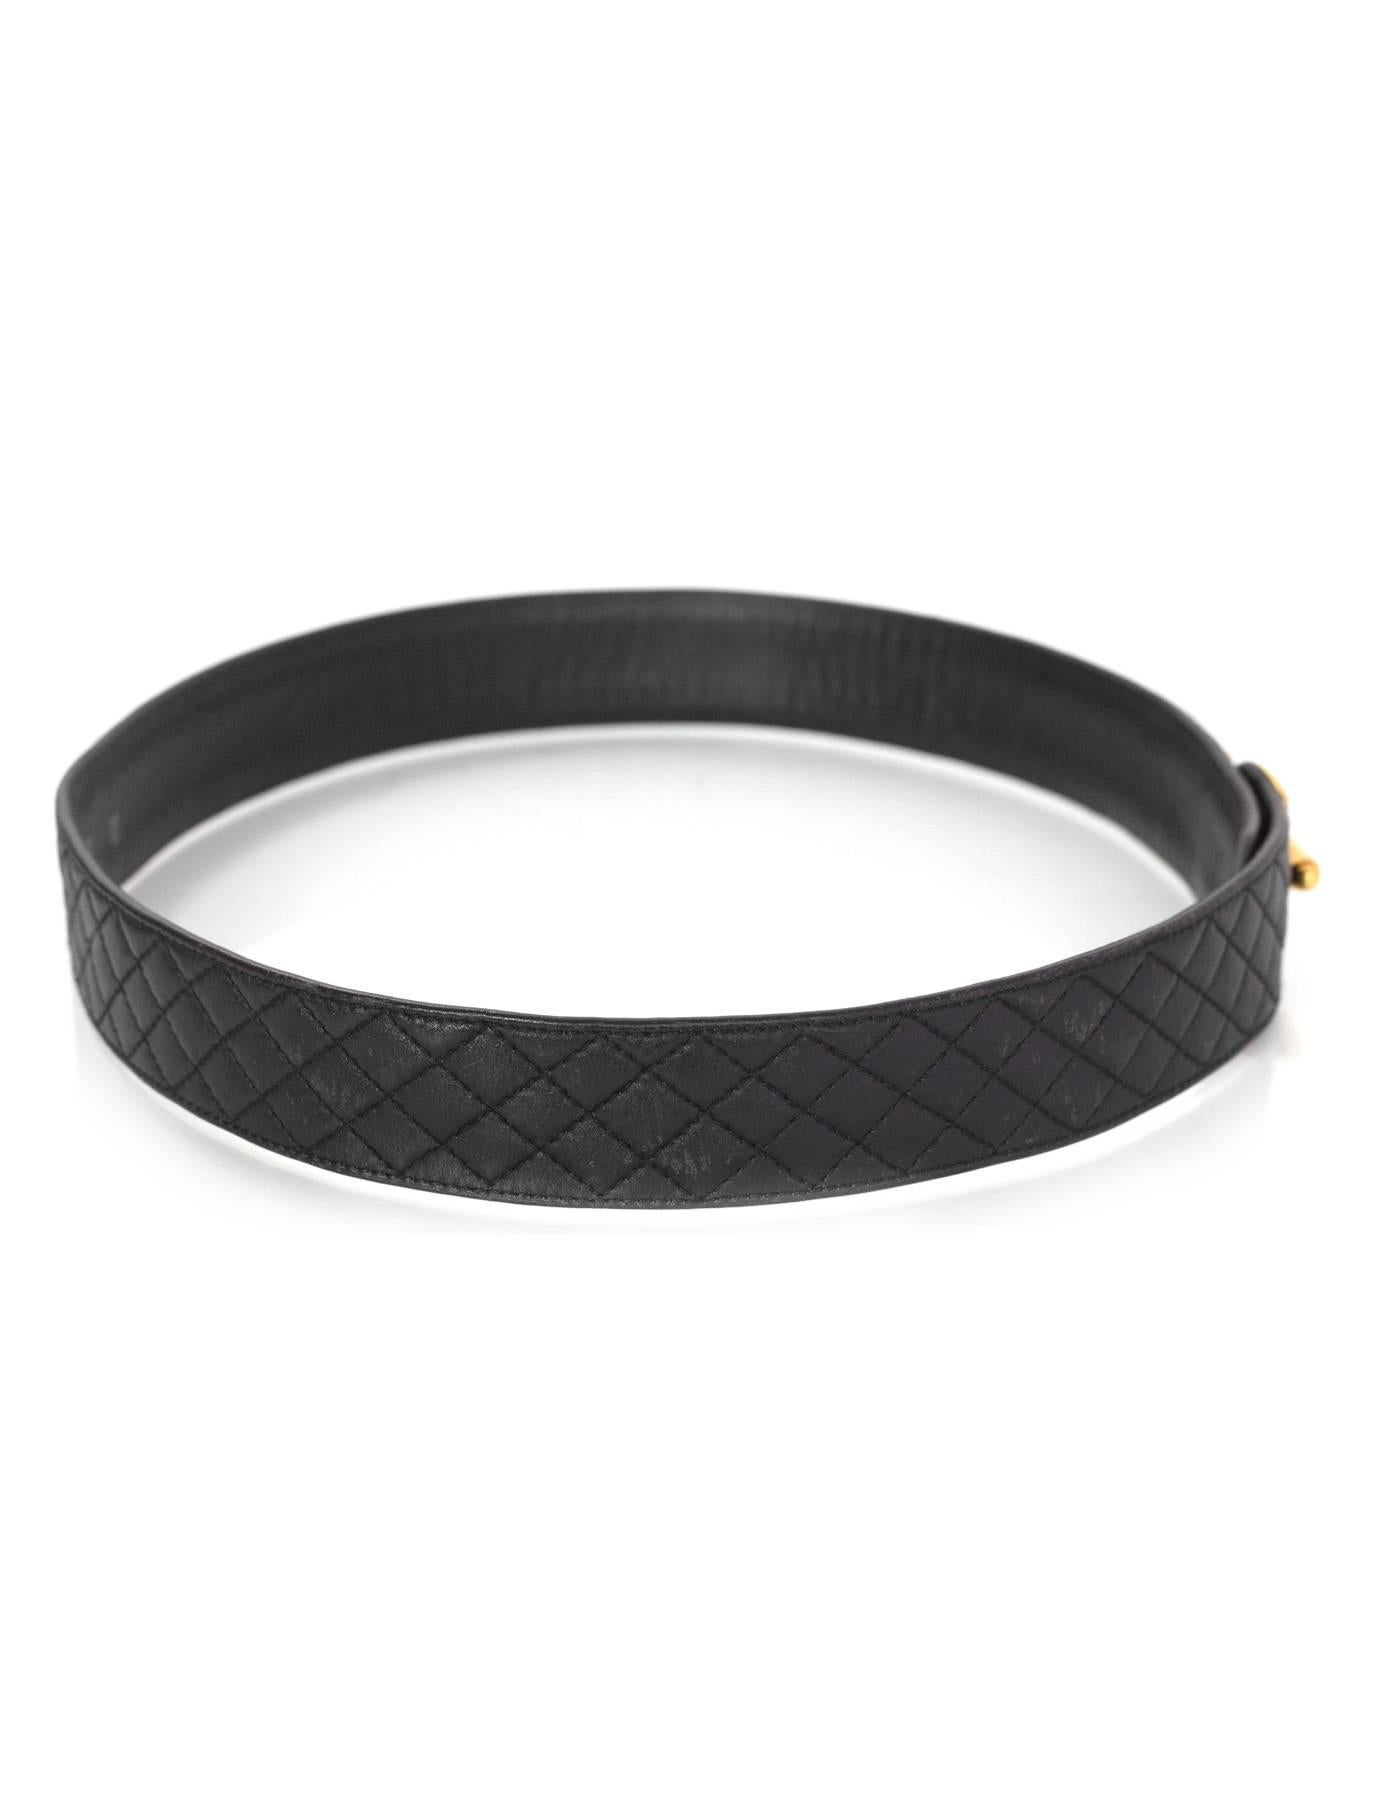 Chanel Black Quilted Leather Belt 
Features goldtone CC latch detail at front

Made In: France
Year of Production: 1994
Color: Black
Hardware: Goldtone
Materials: Leather
Closure/Opening: Snap button and front latch closure
Stamp: 94 CC P
Overall